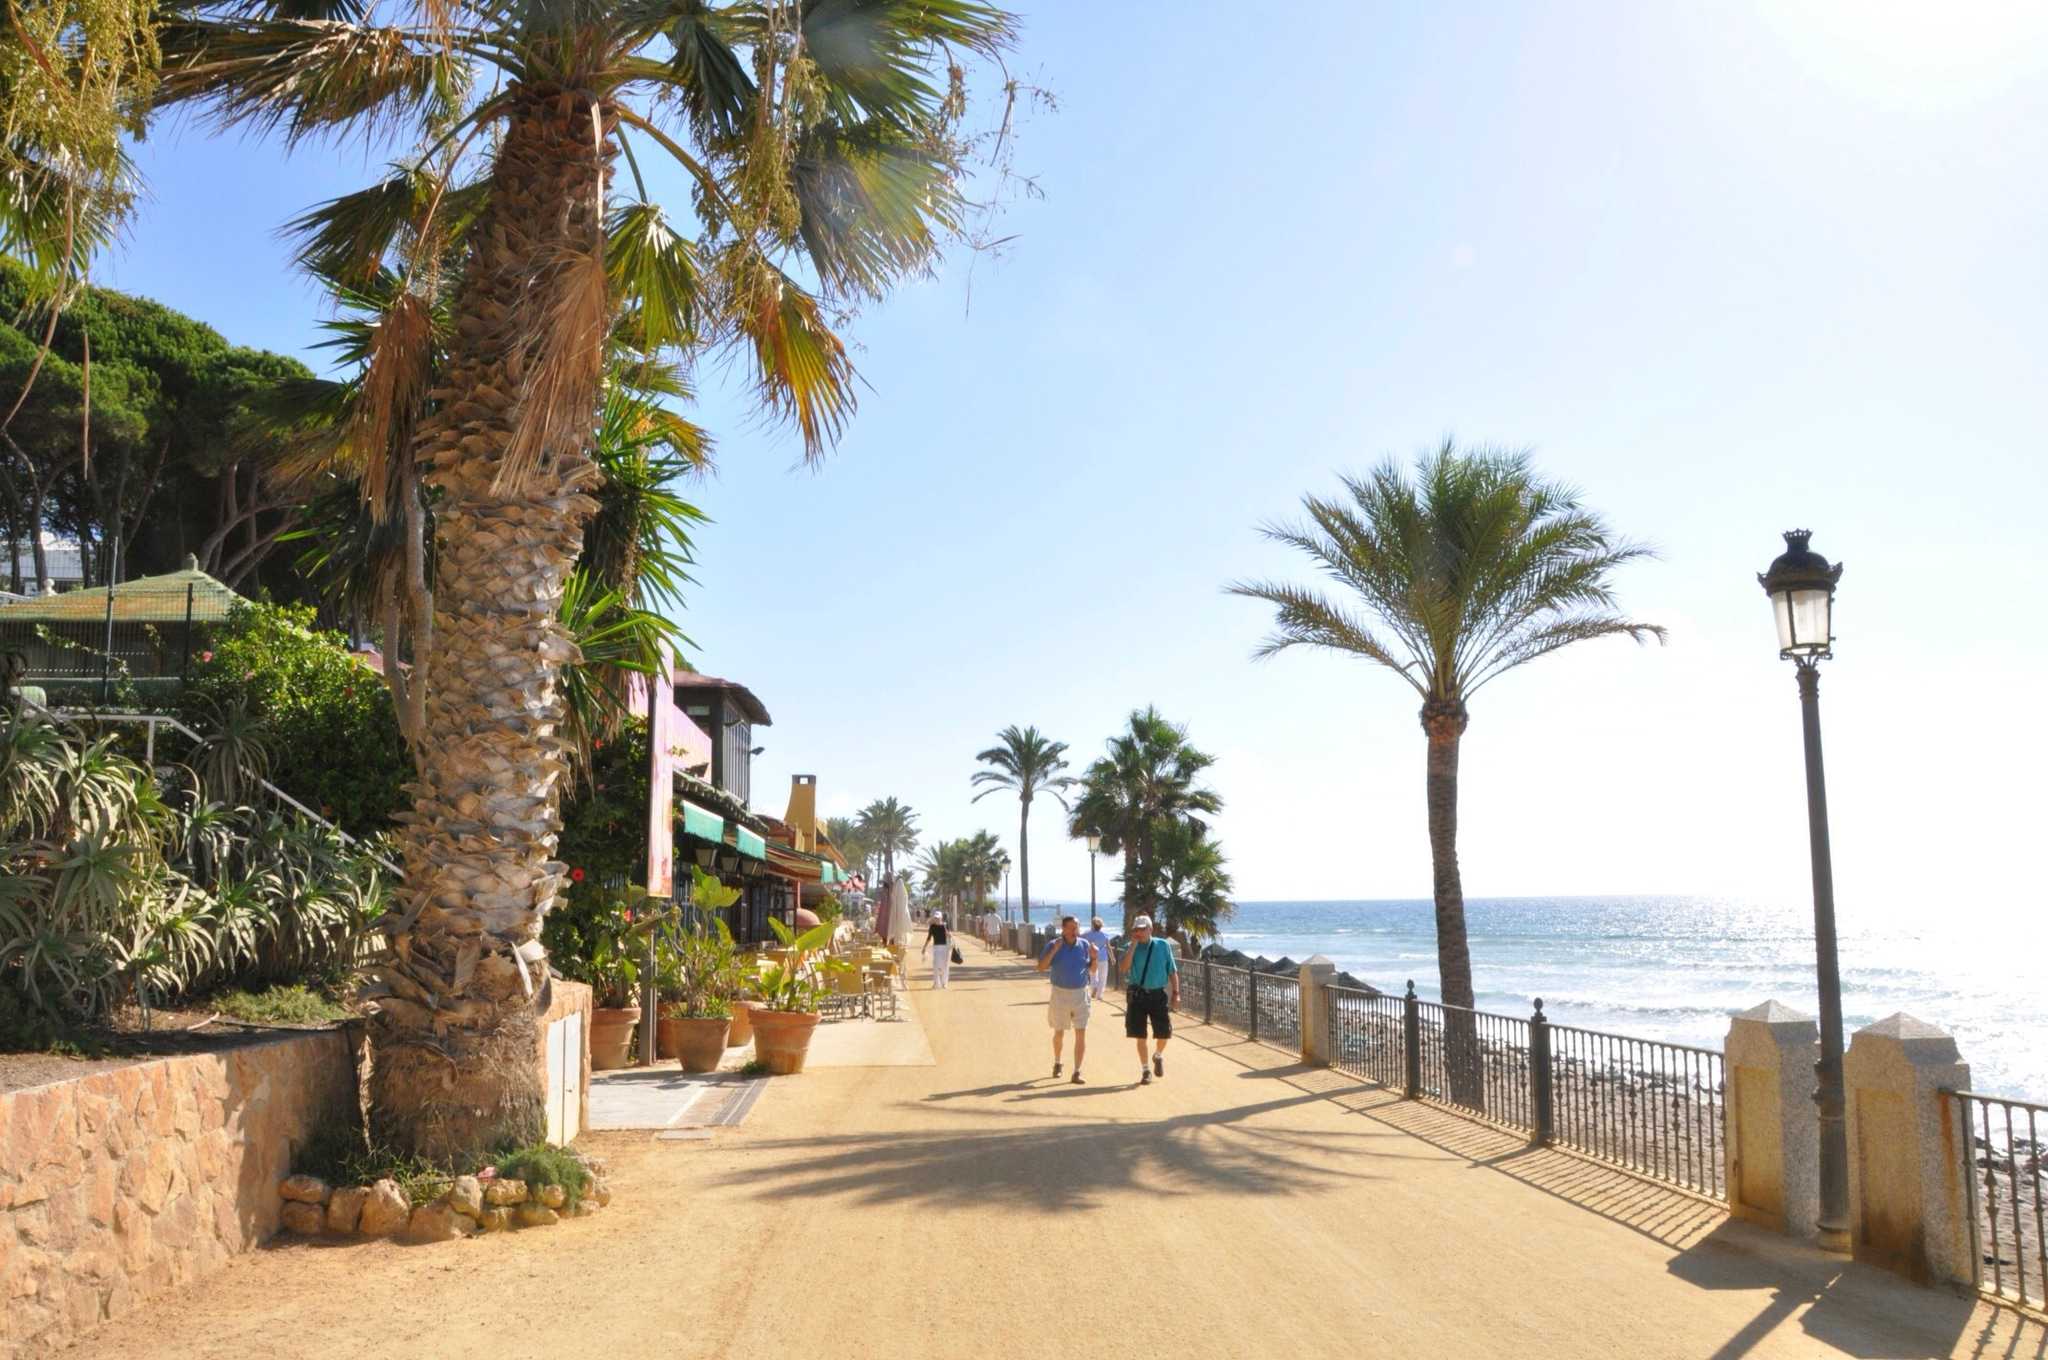 A day in Puerto Banus: what to see, what to do and what to eat 3